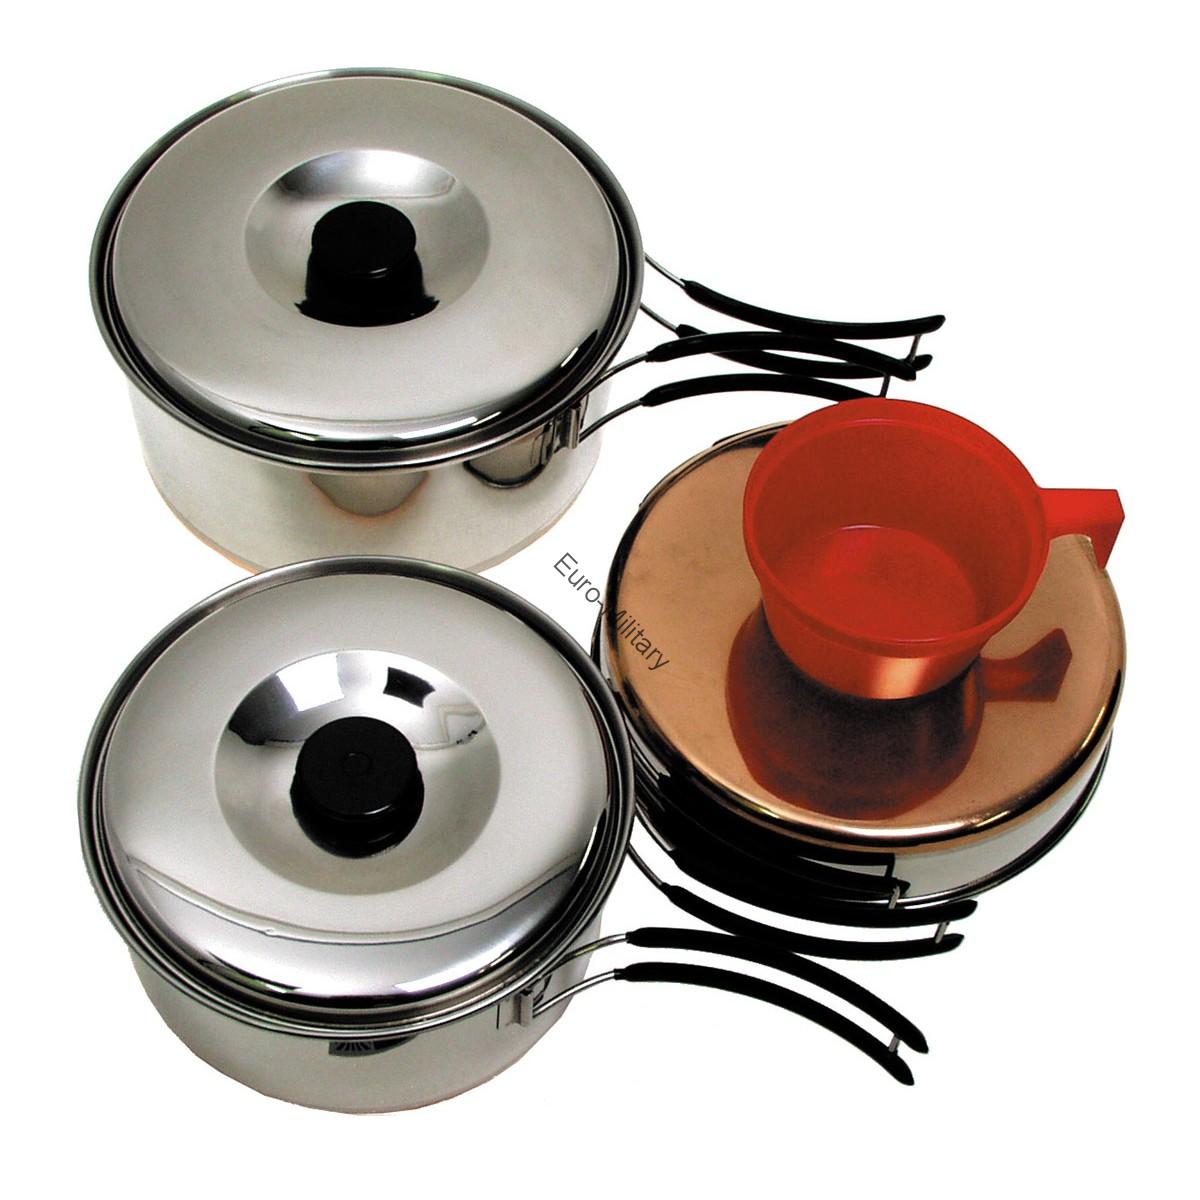 Camping Cook Fully Set - Stainless Steel